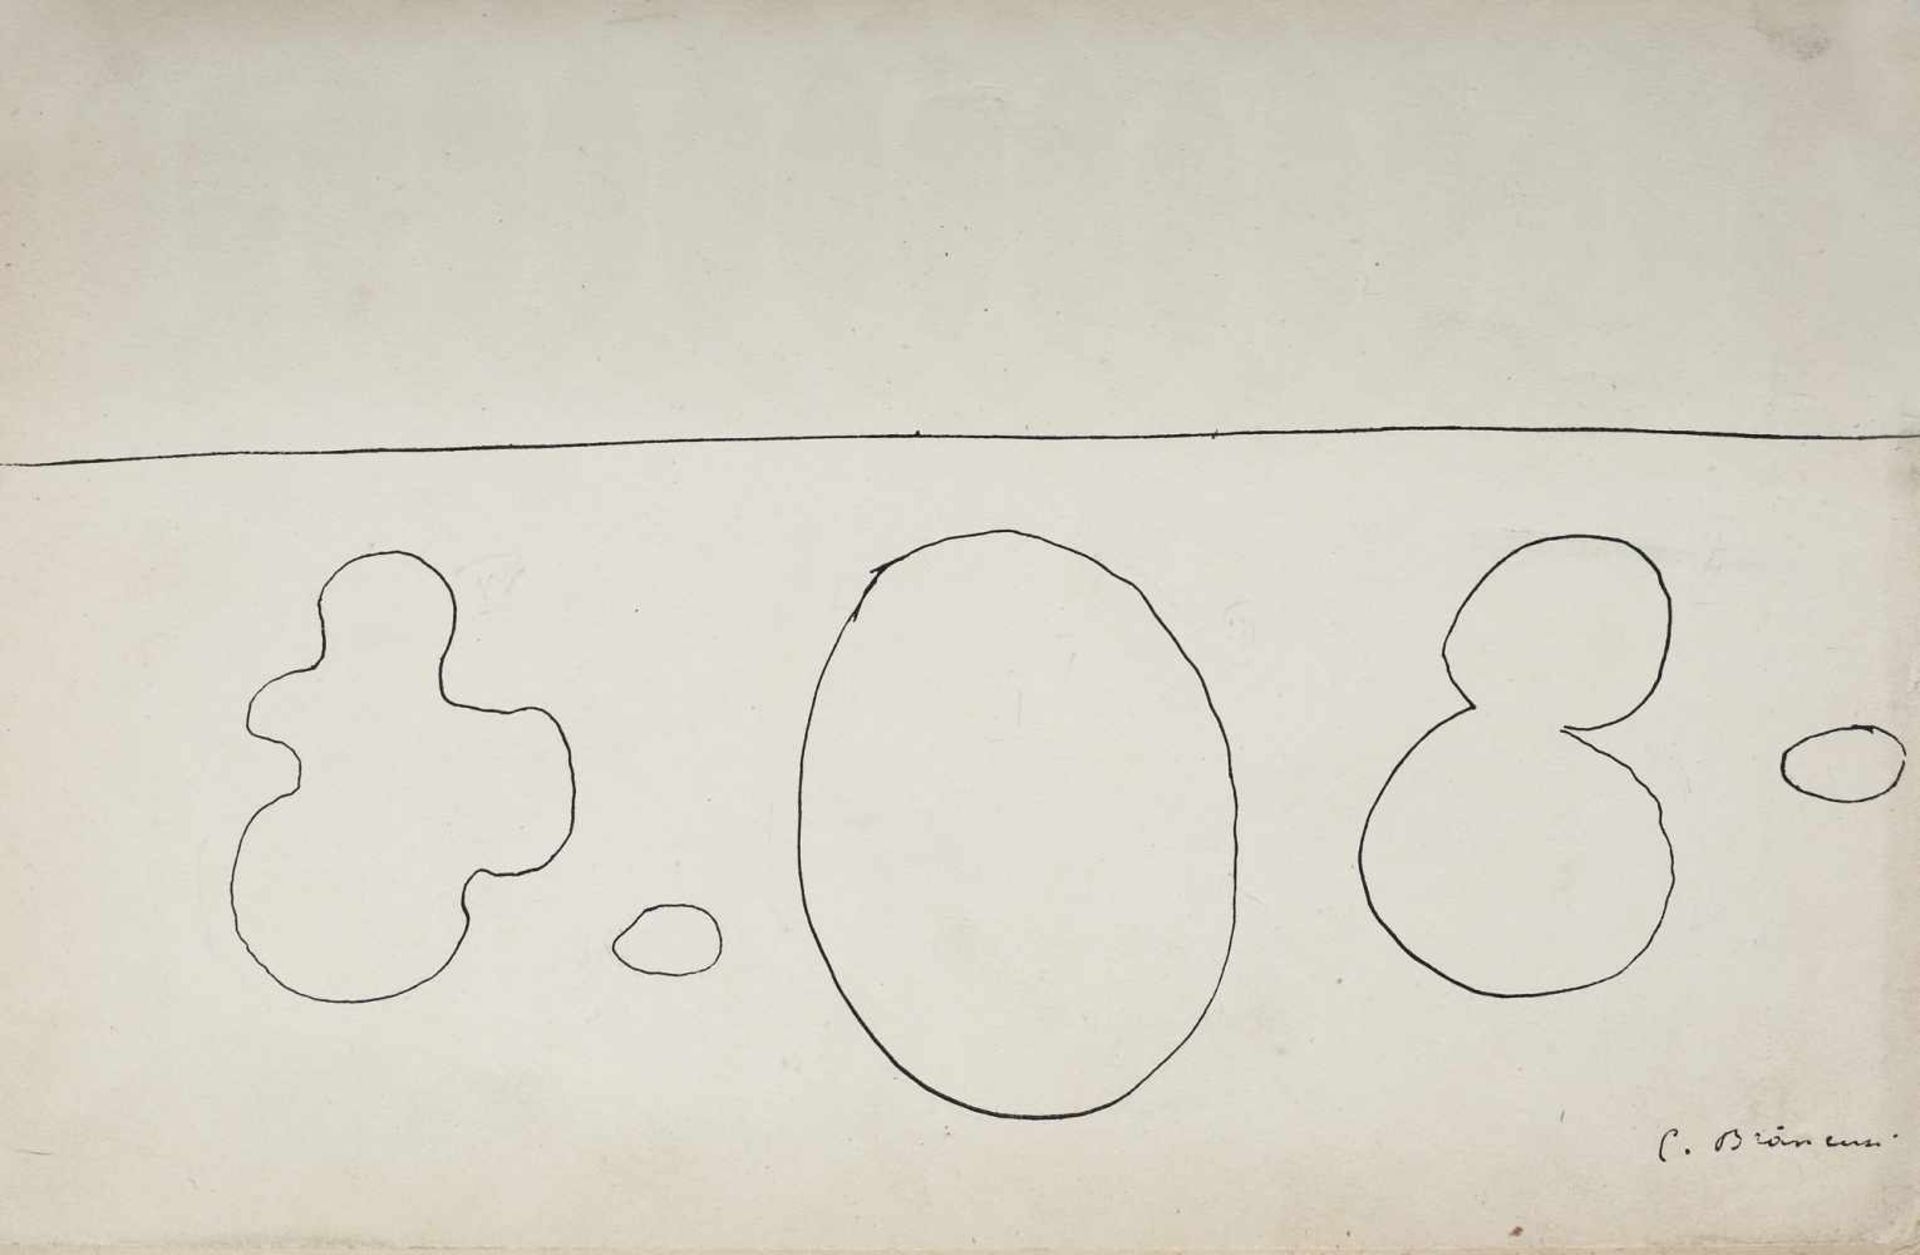 "Plants and animals”, by Ilarie Voronca, 1929, with drawings by Constantin Brâncuși - Bild 3 aus 5